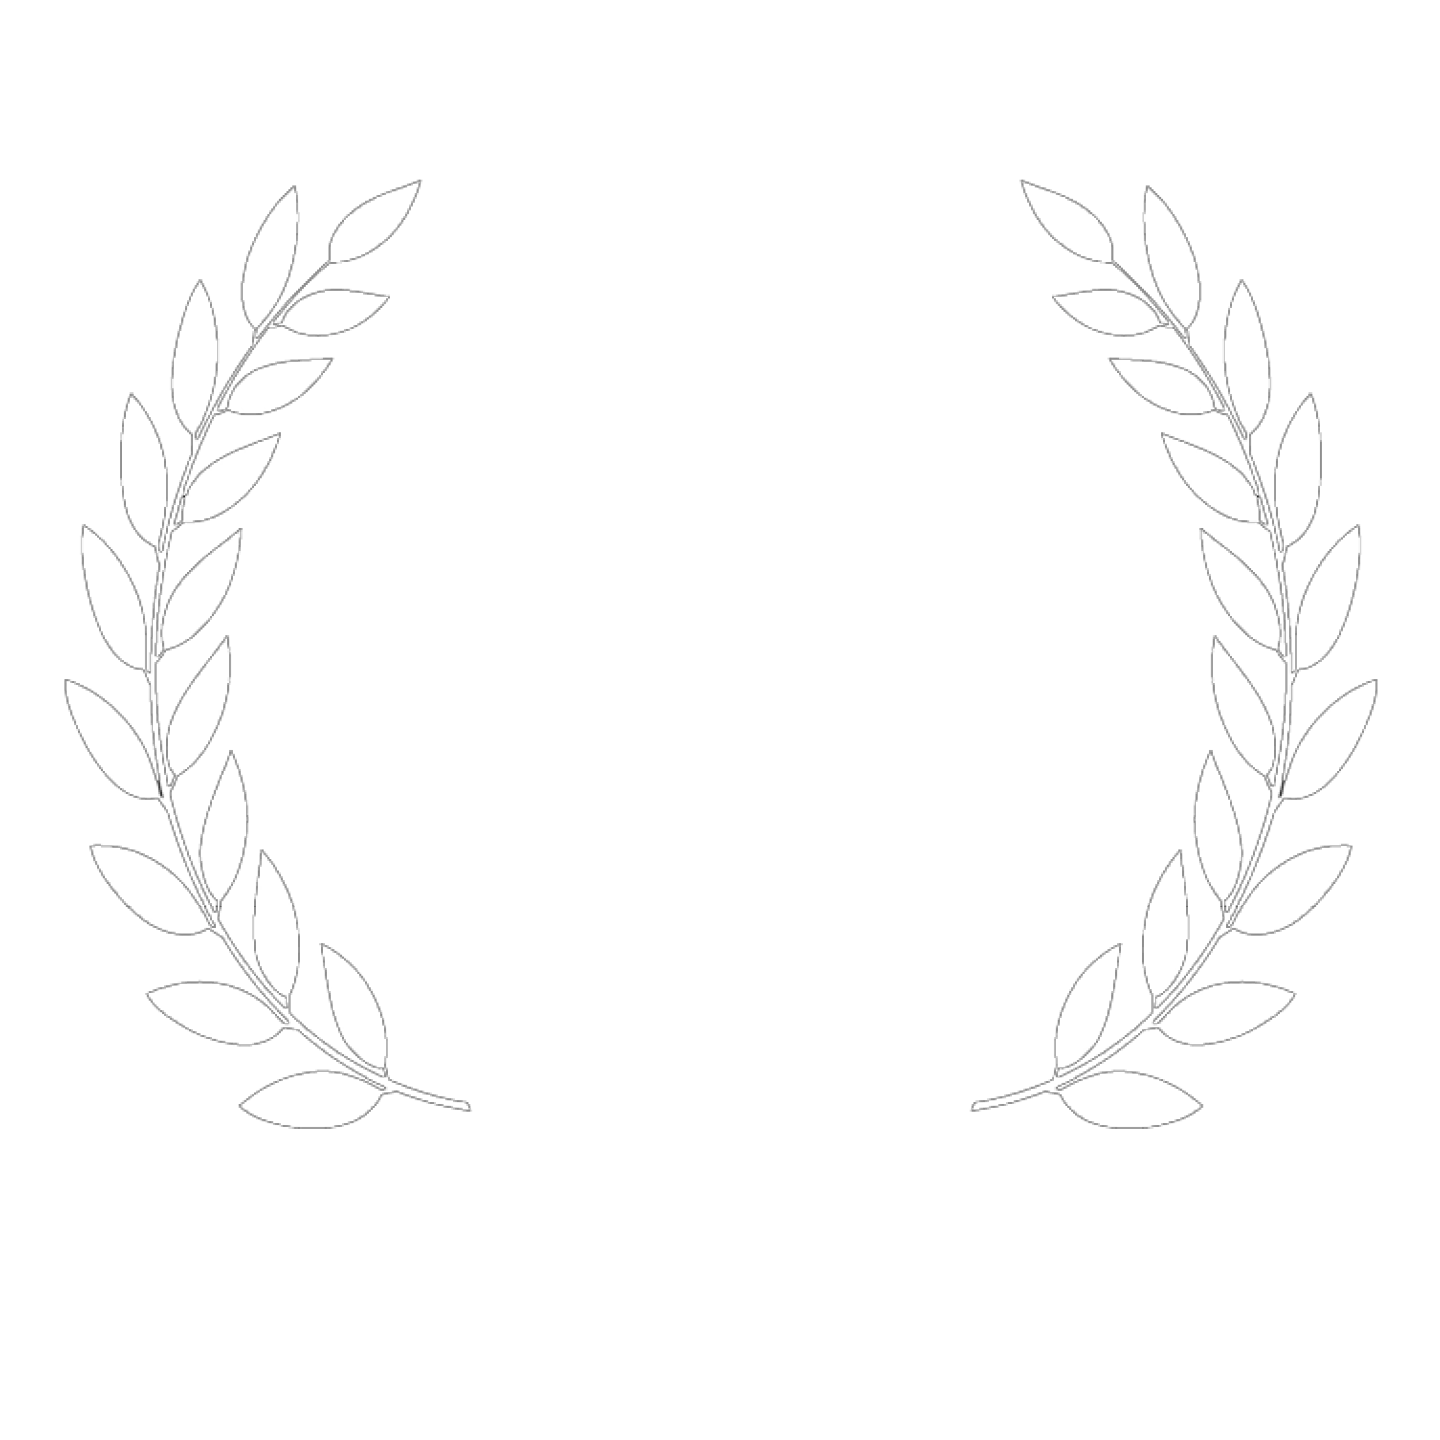 Writers' Guild Award - Best Play for Young Audiences - Daniel Ward